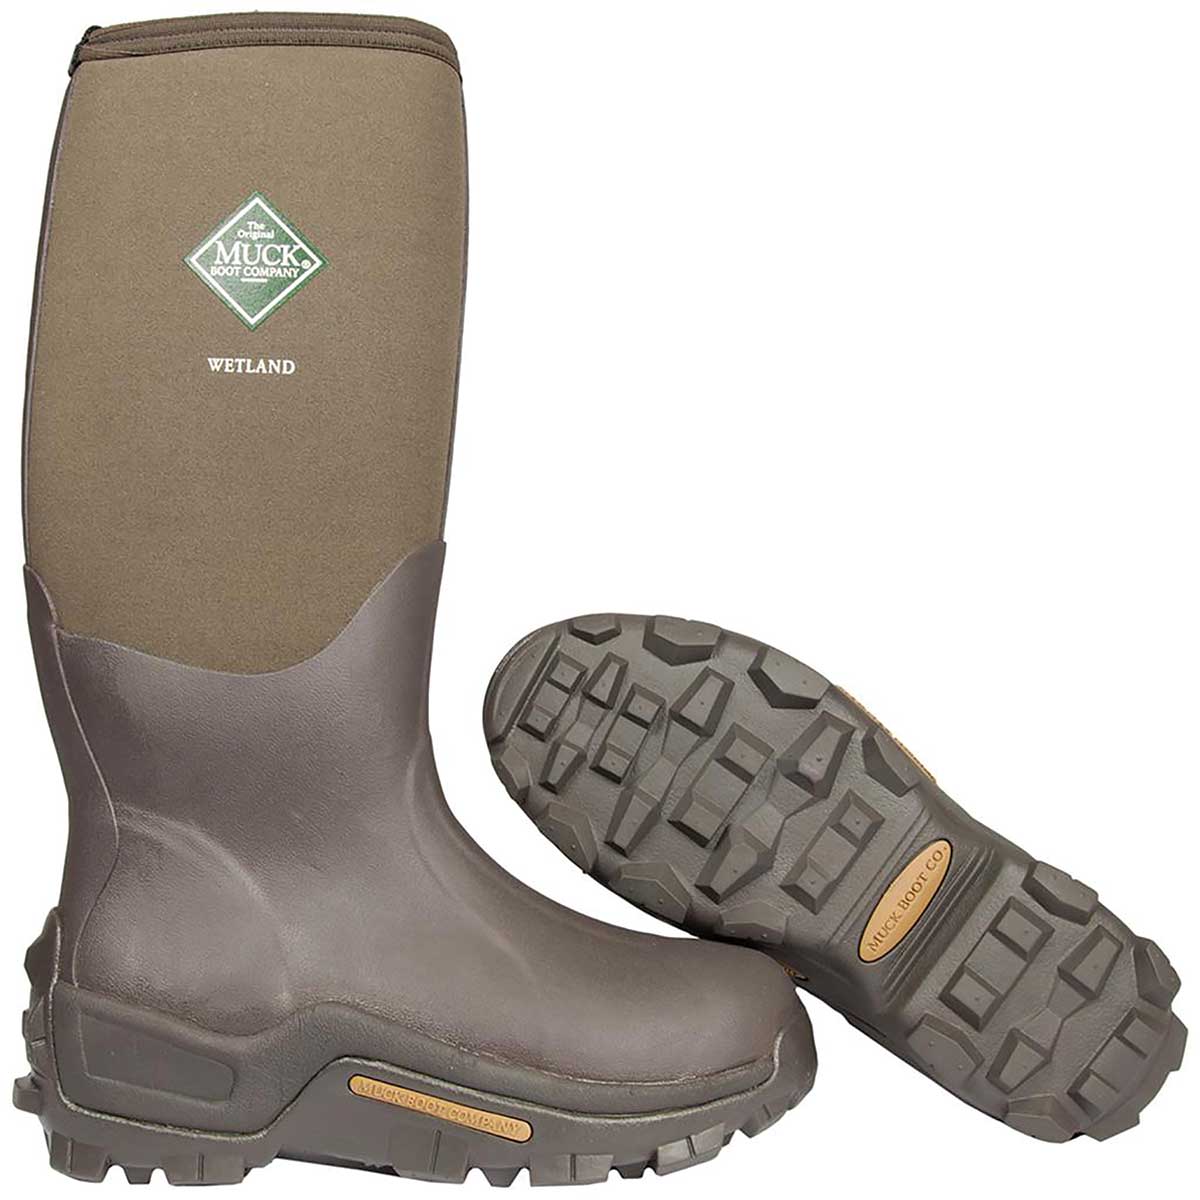 Muck Boot Co. Wetland Boots | Gemplers